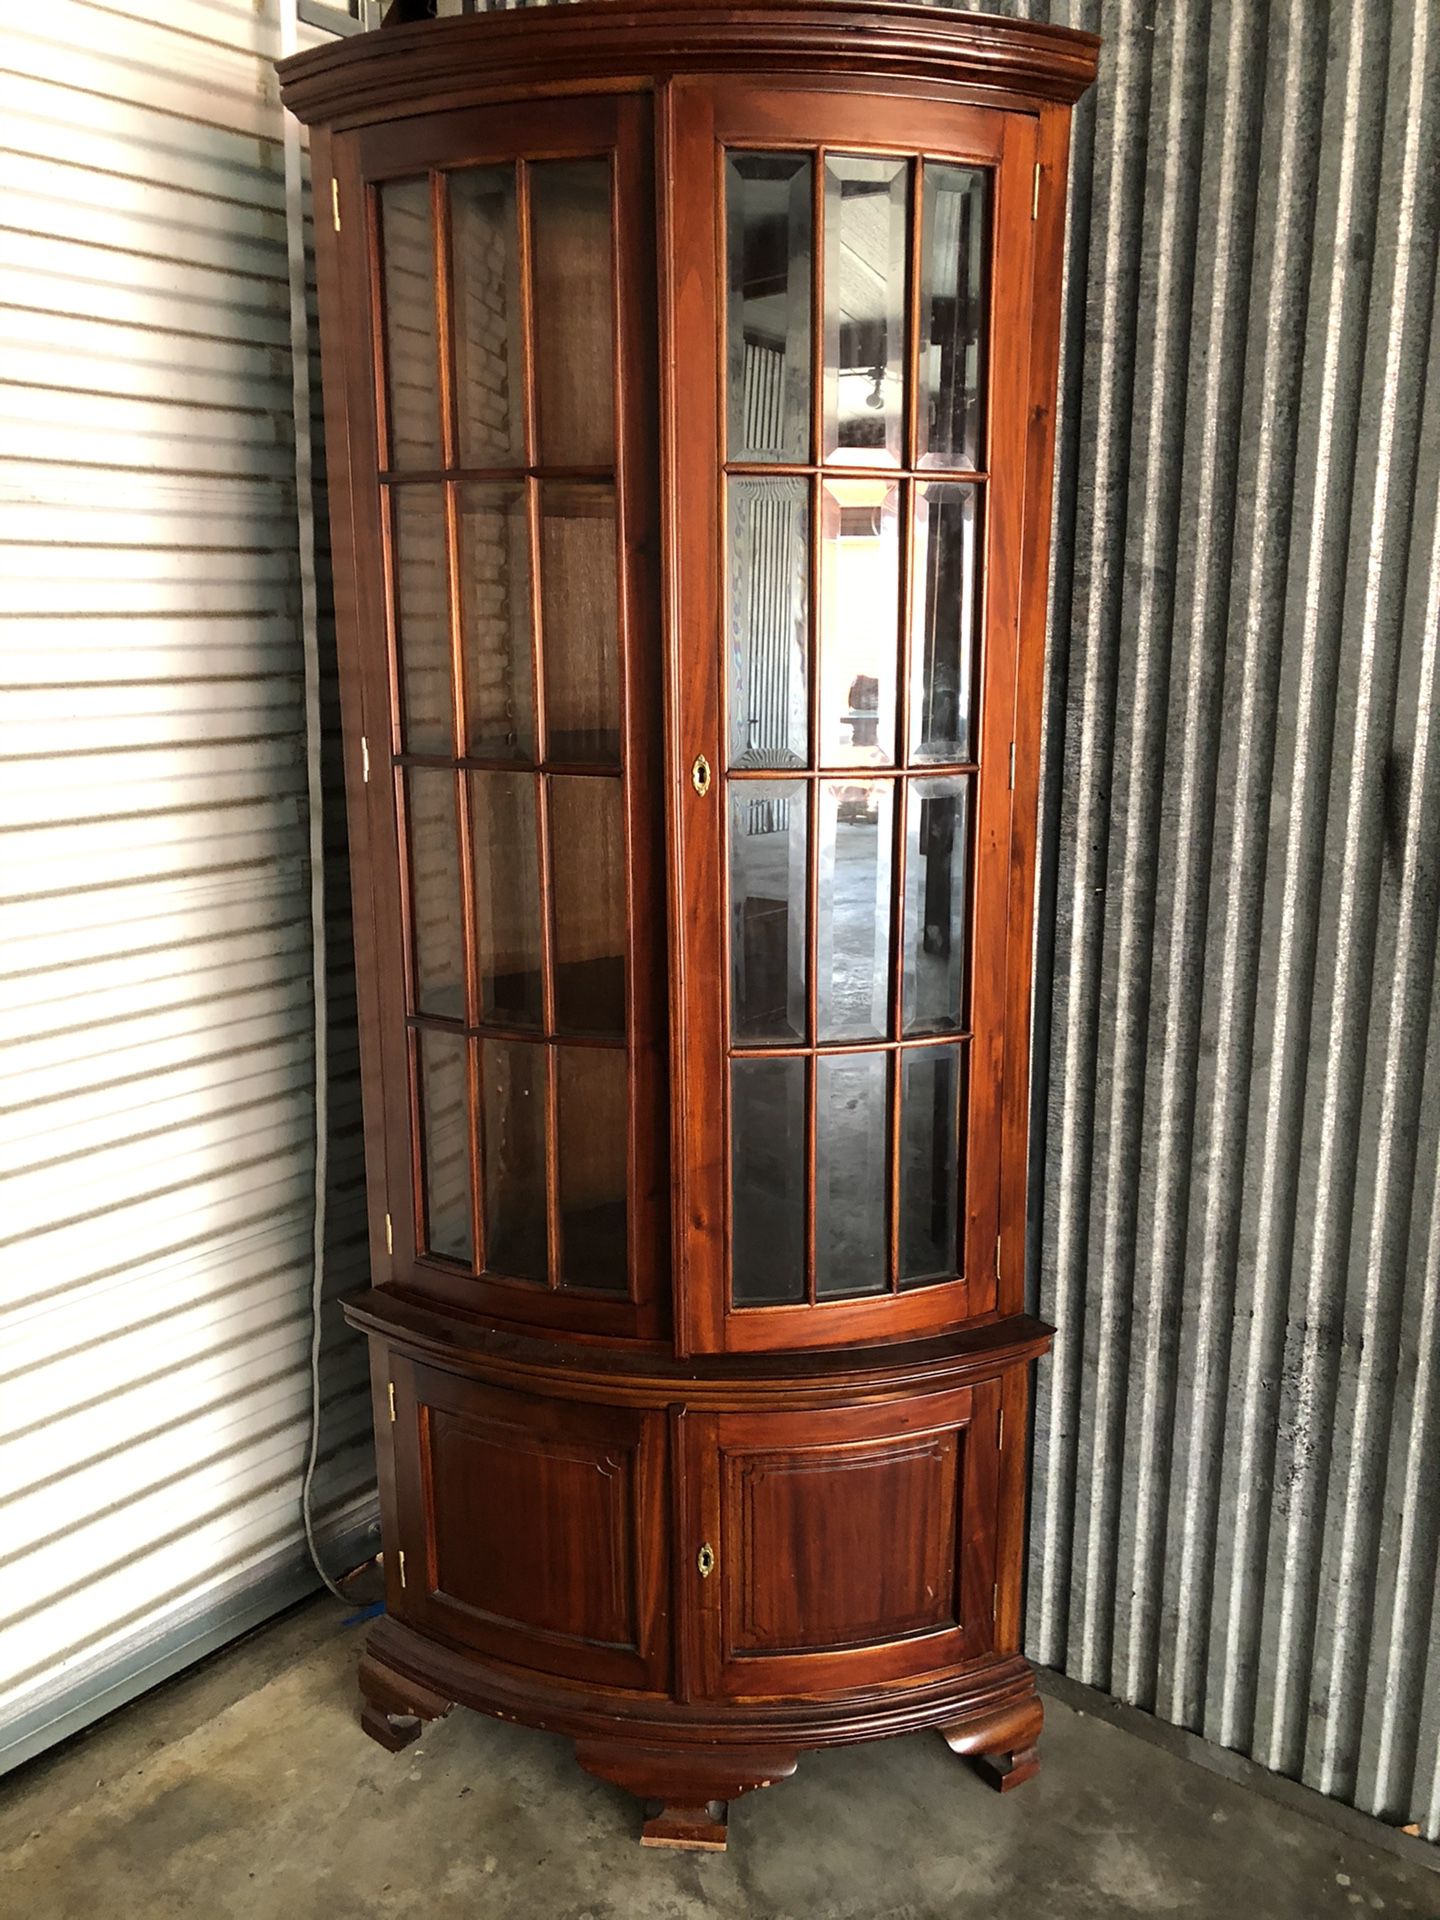 Corner wood cabinet 4 shelves top and storage on bottom with key Glass panels curved look 78.75” h